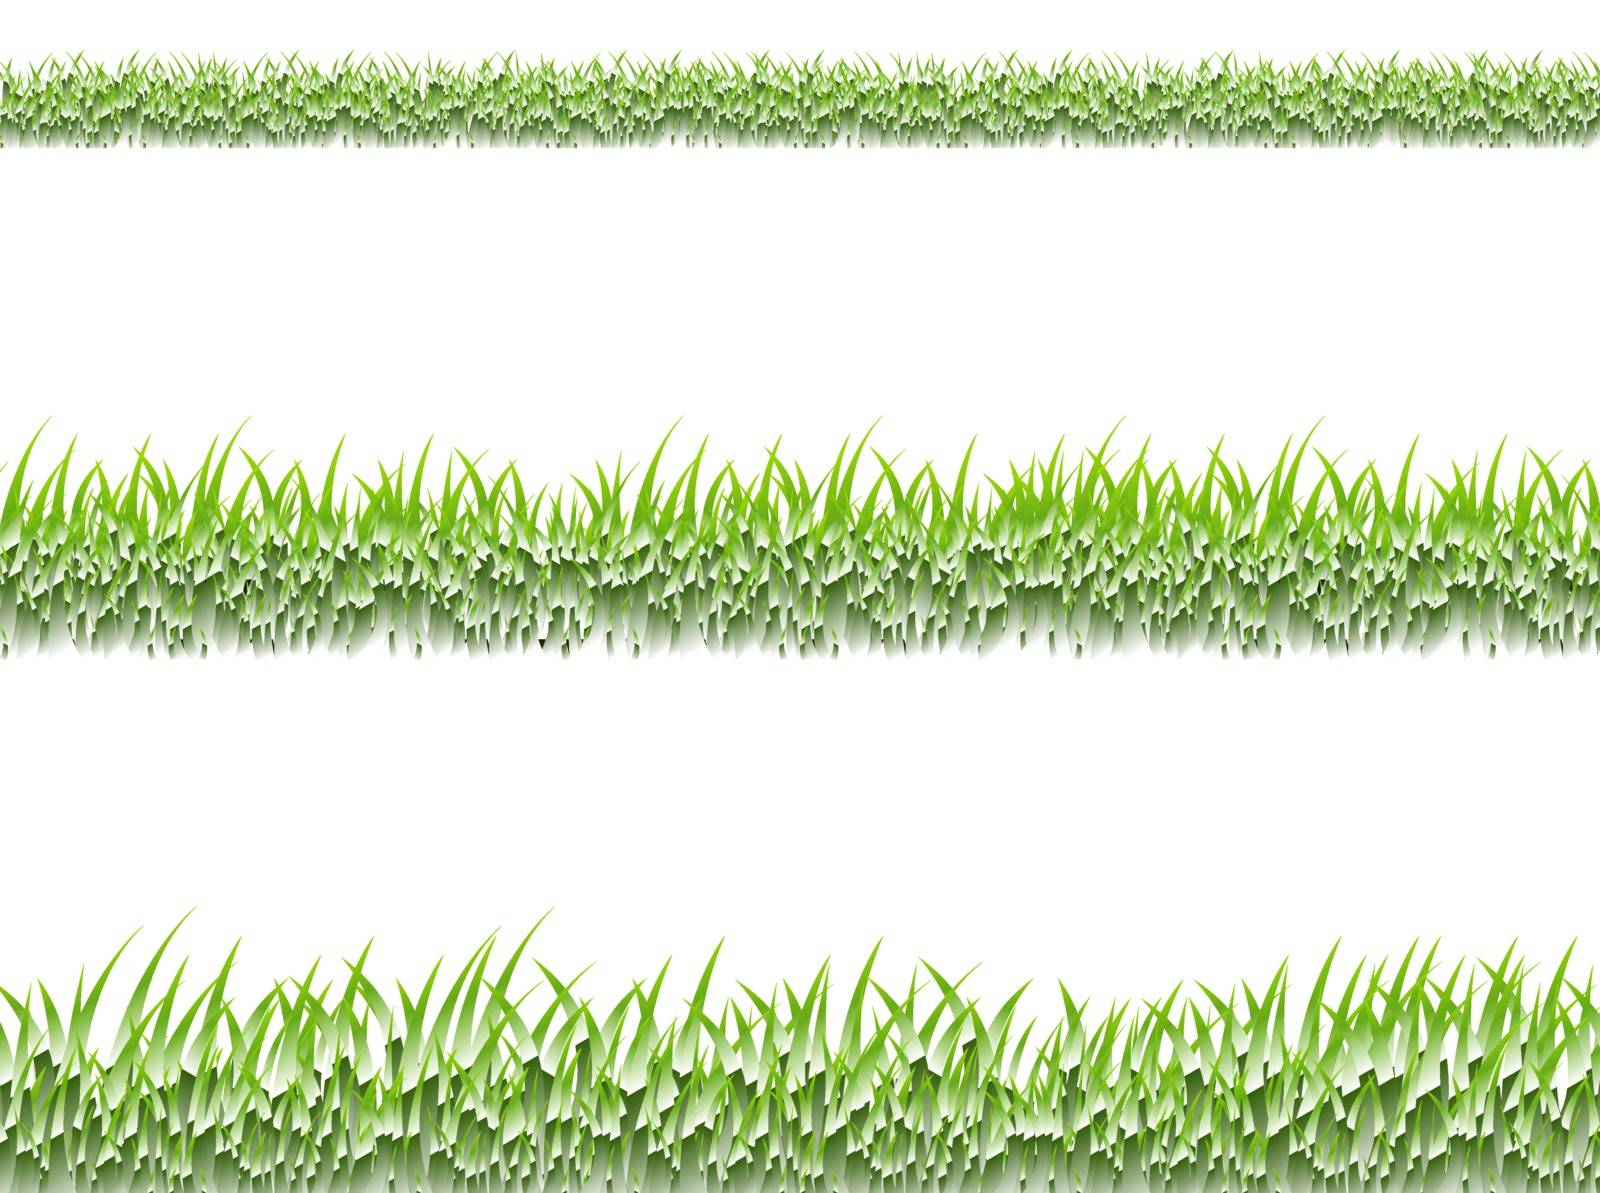 Grass Border by barbaliss